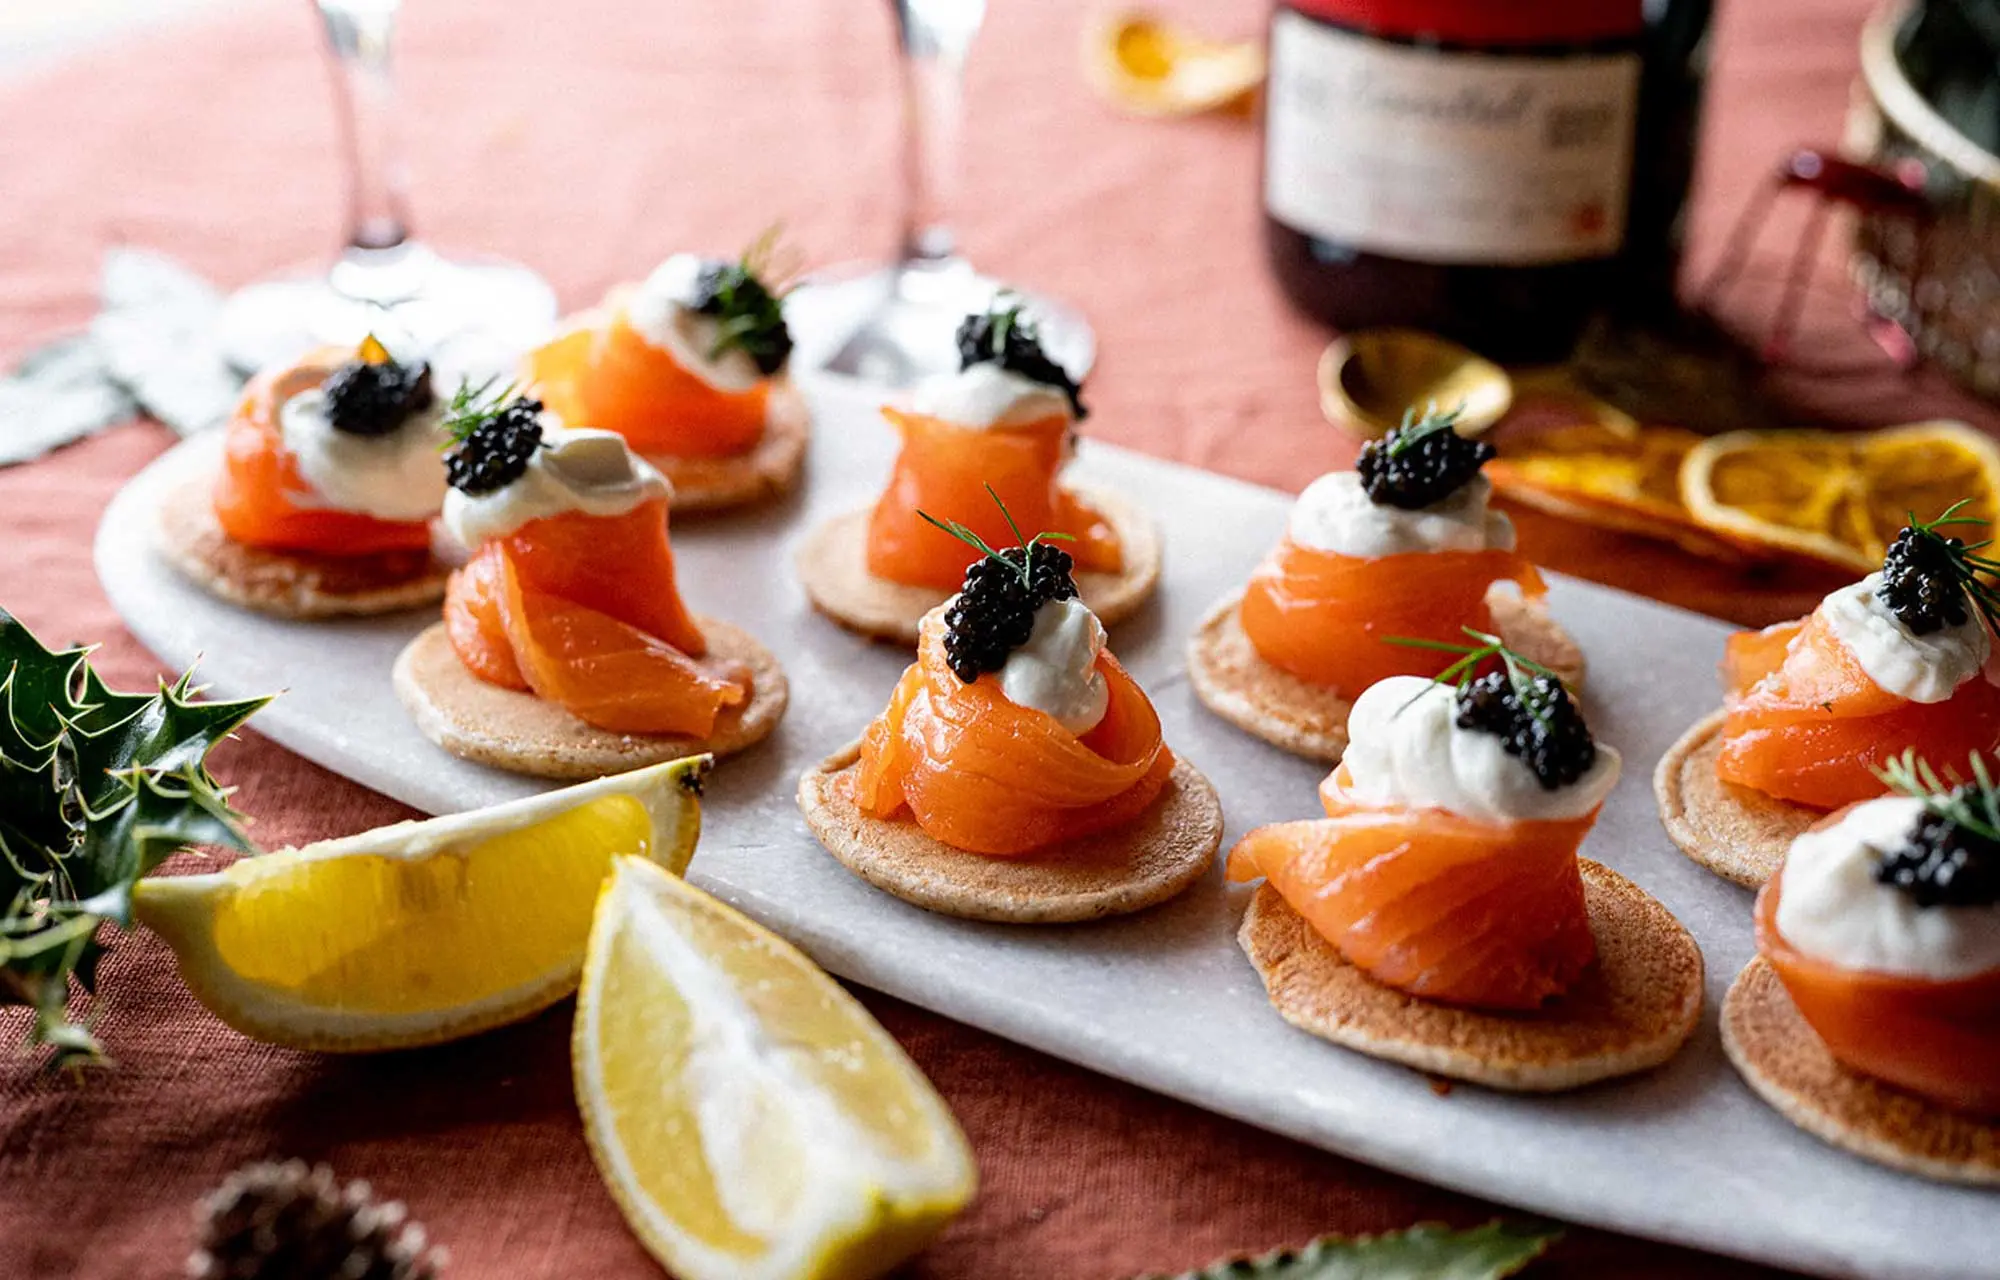 blini with caviar and smoked salmon - What does salmon caviar go well with